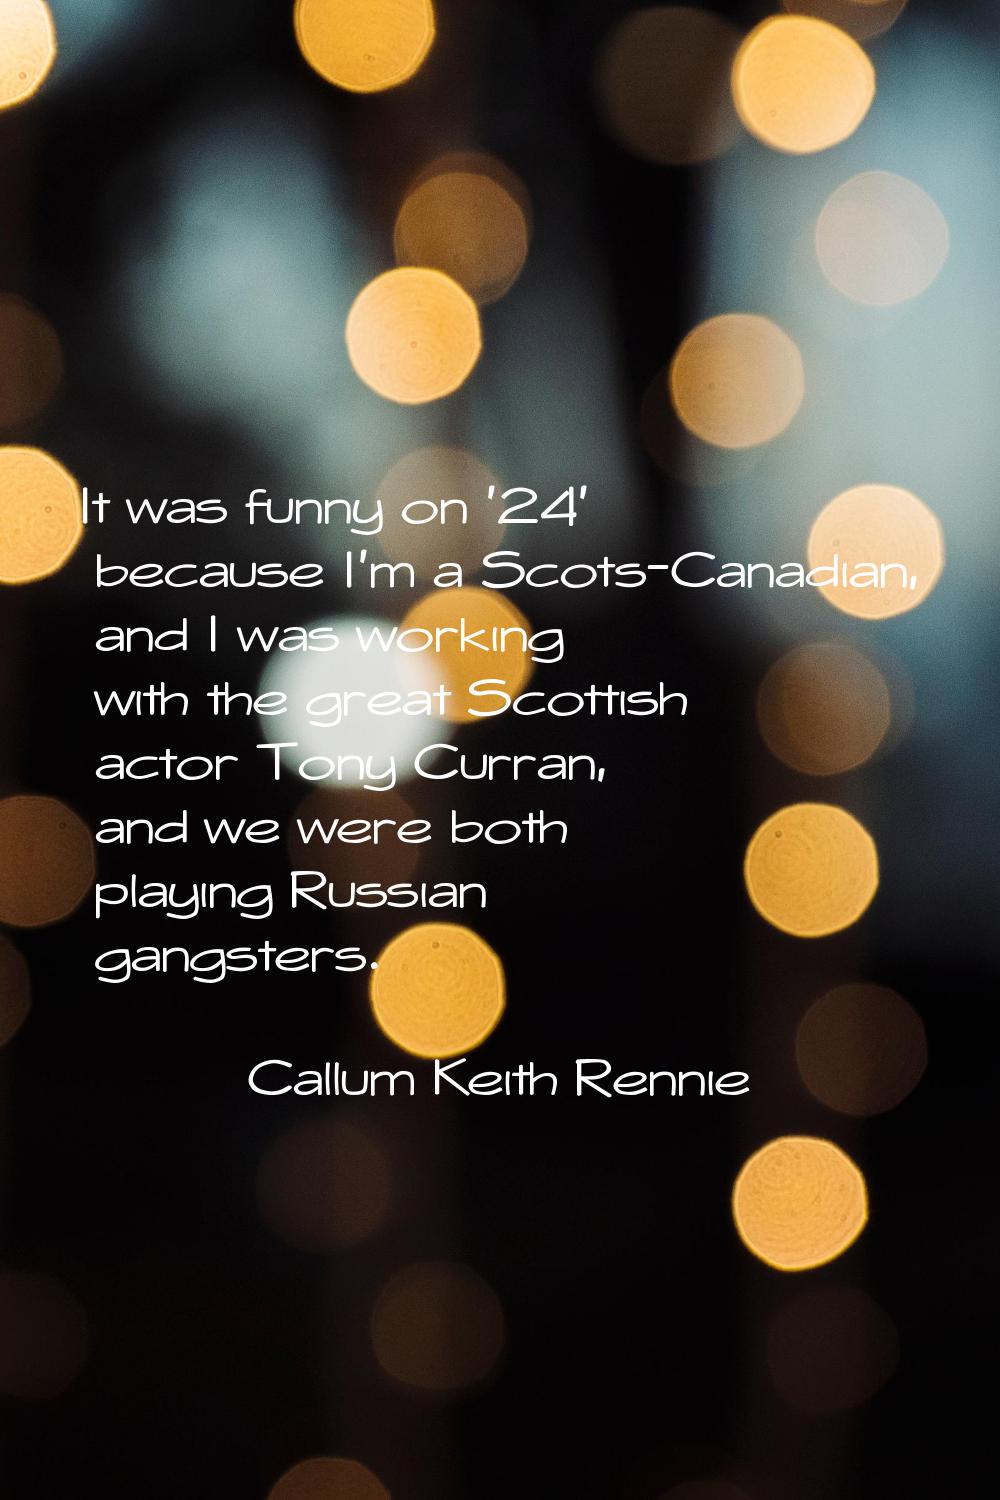 It was funny on '24' because I'm a Scots-Canadian, and I was working with the great Scottish actor 